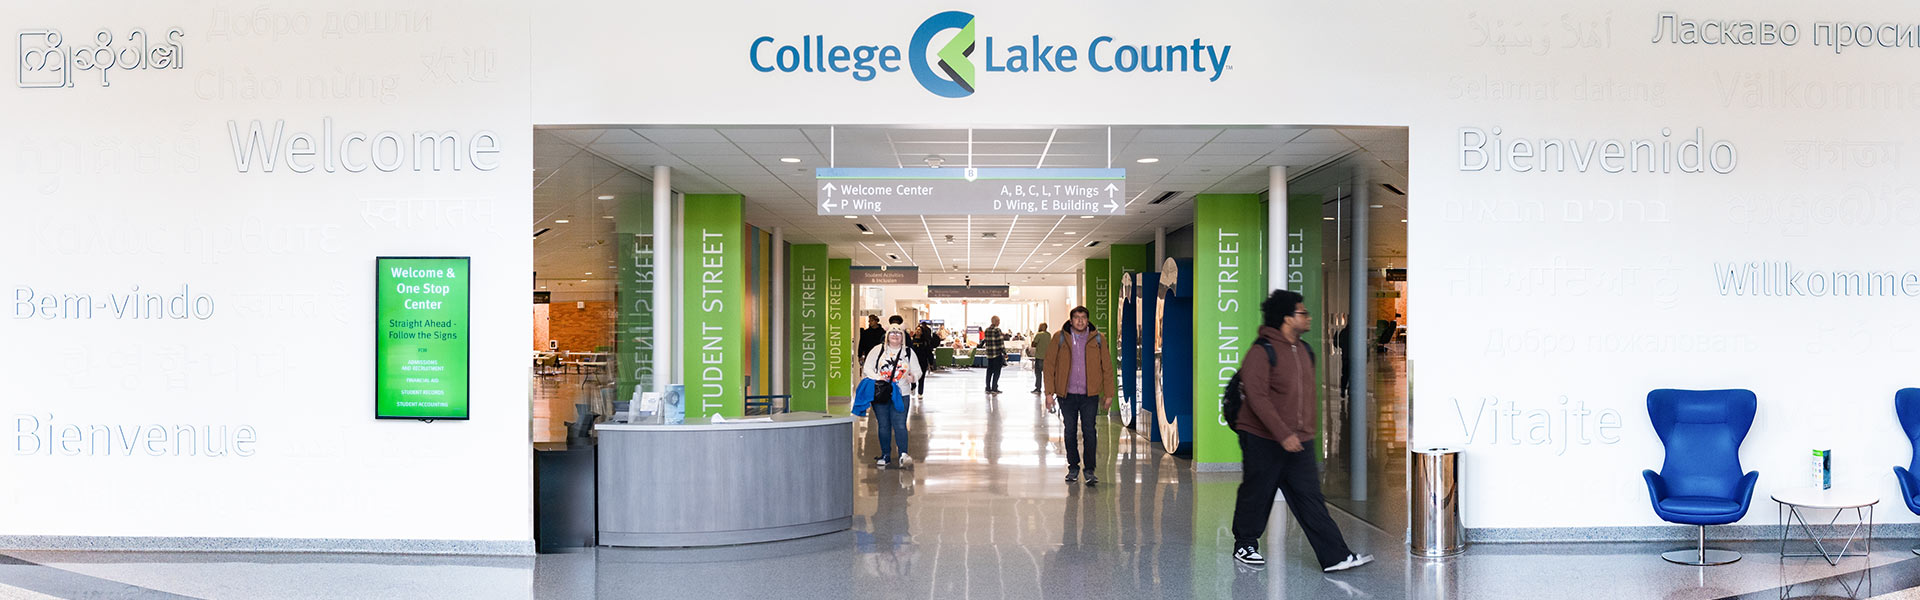 CLC Grayslake interior entrance with students walking